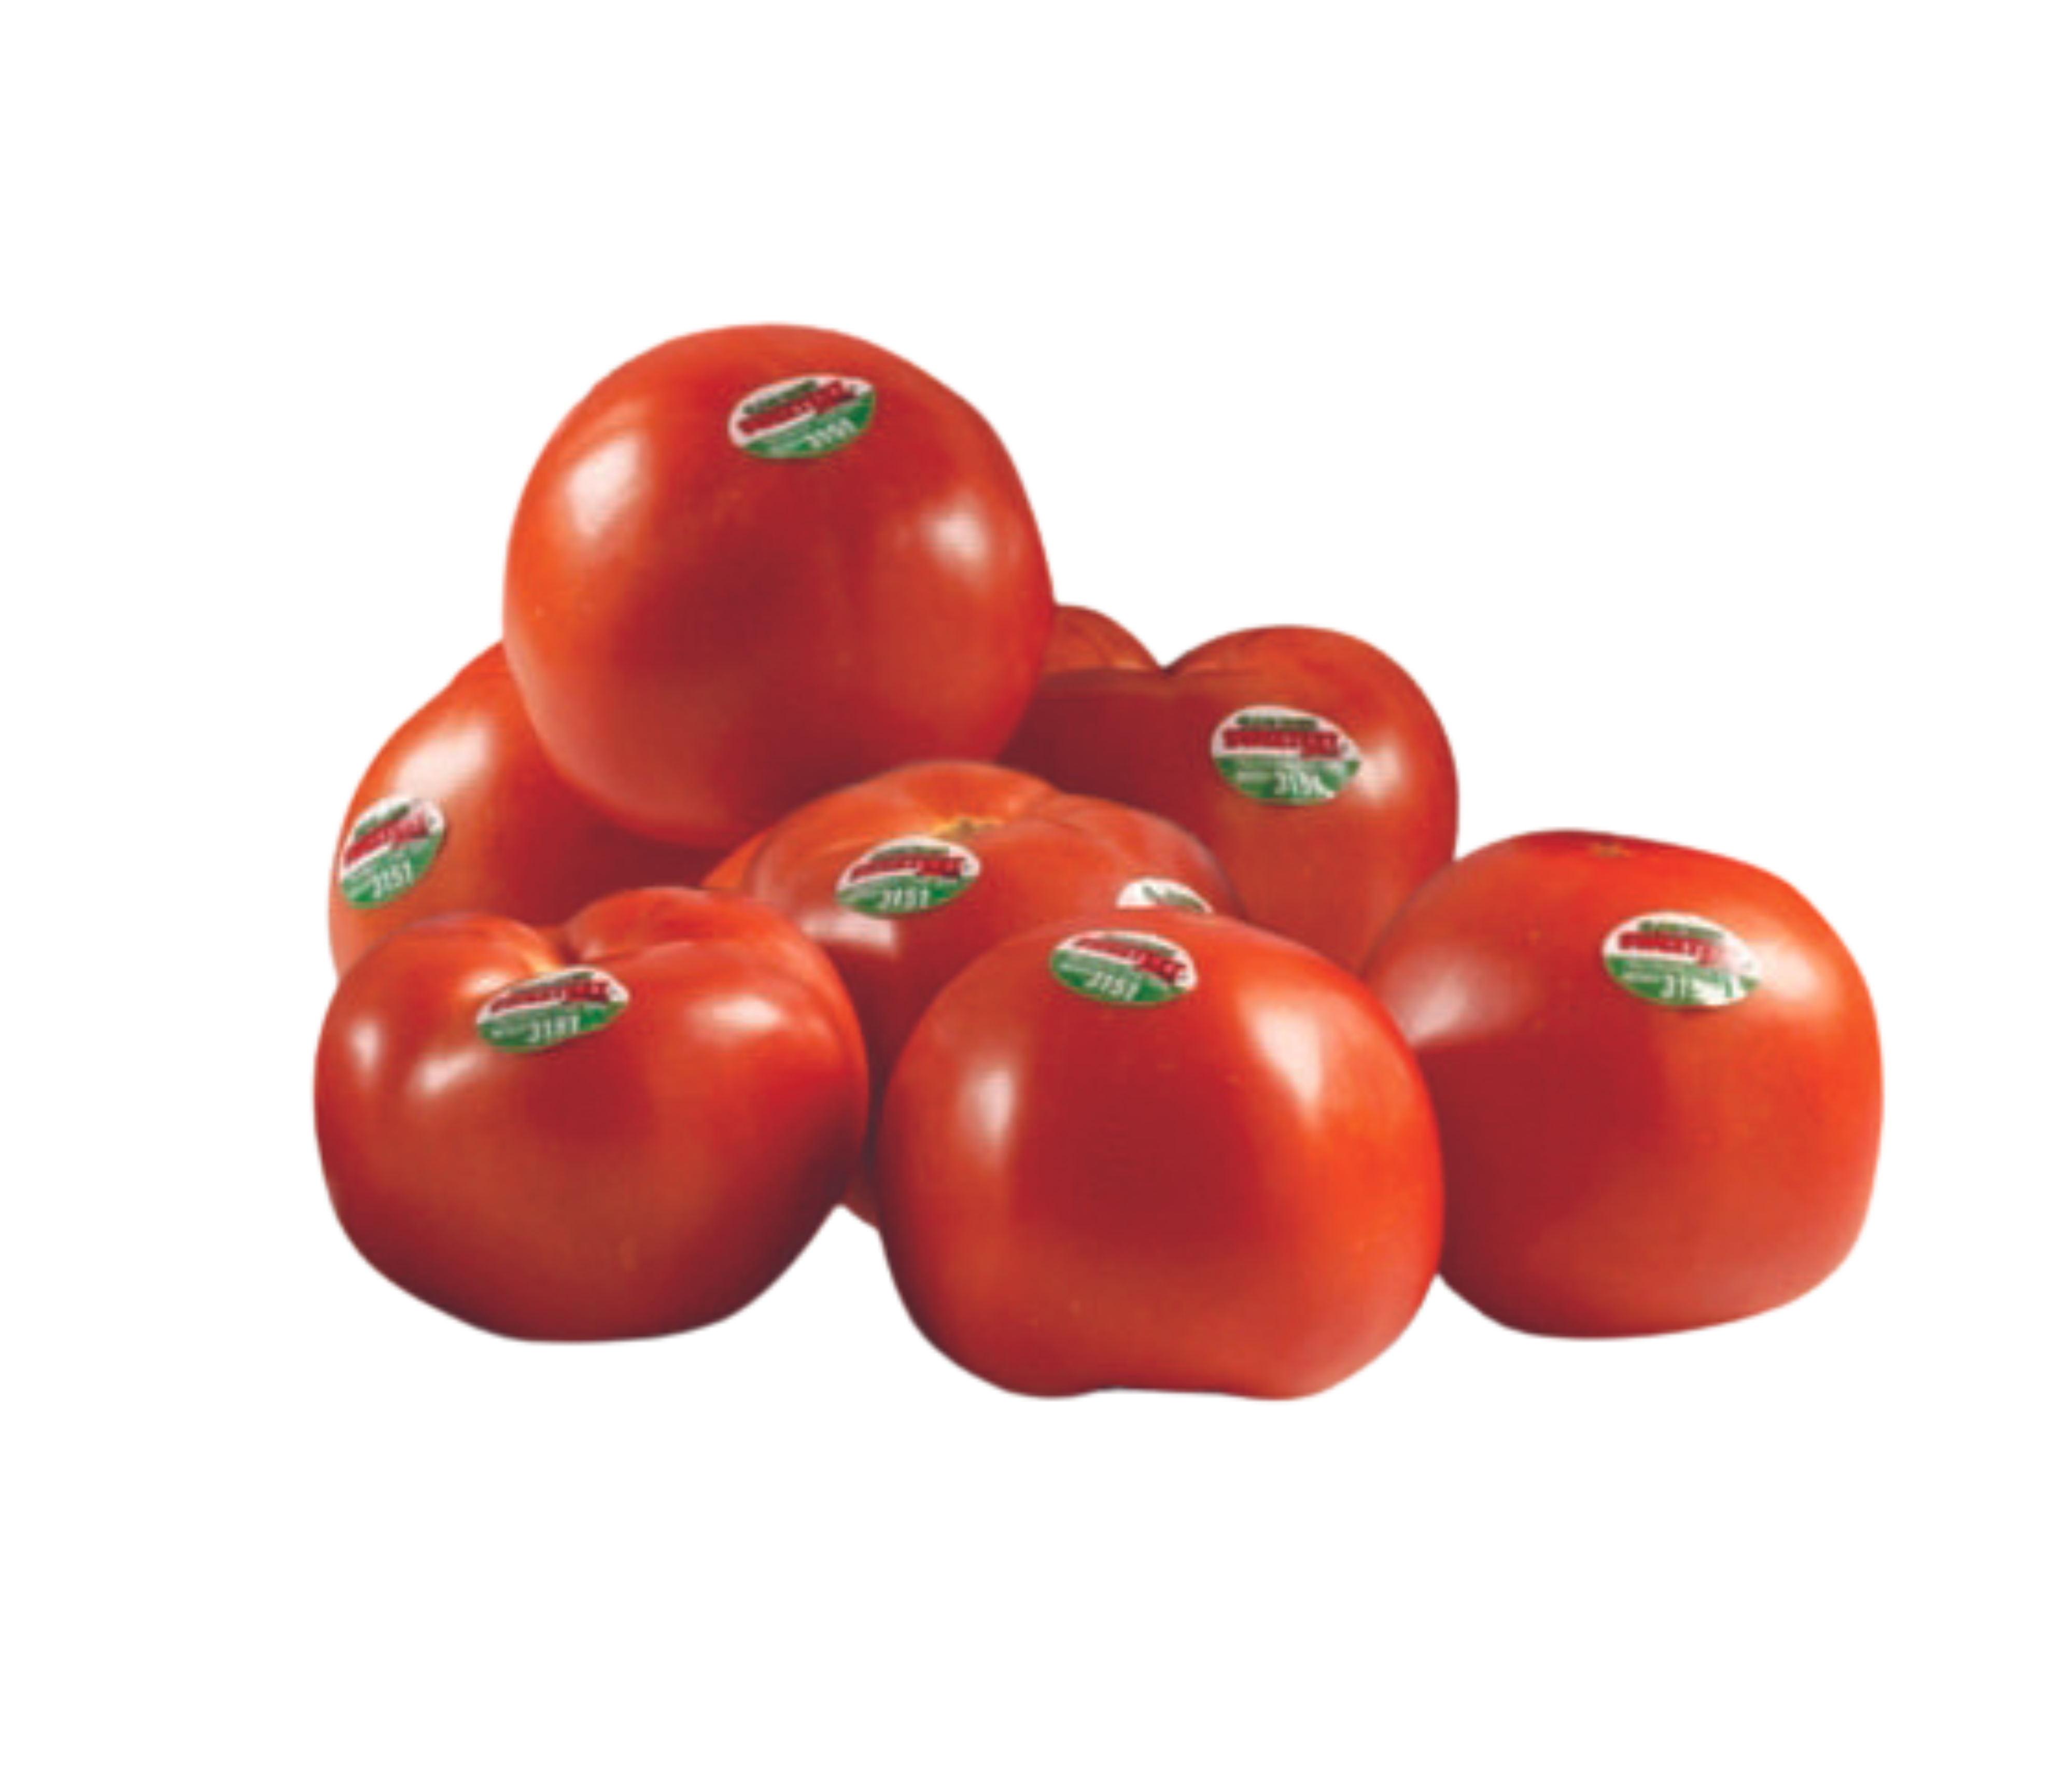 Tomatoes with PLU stickers